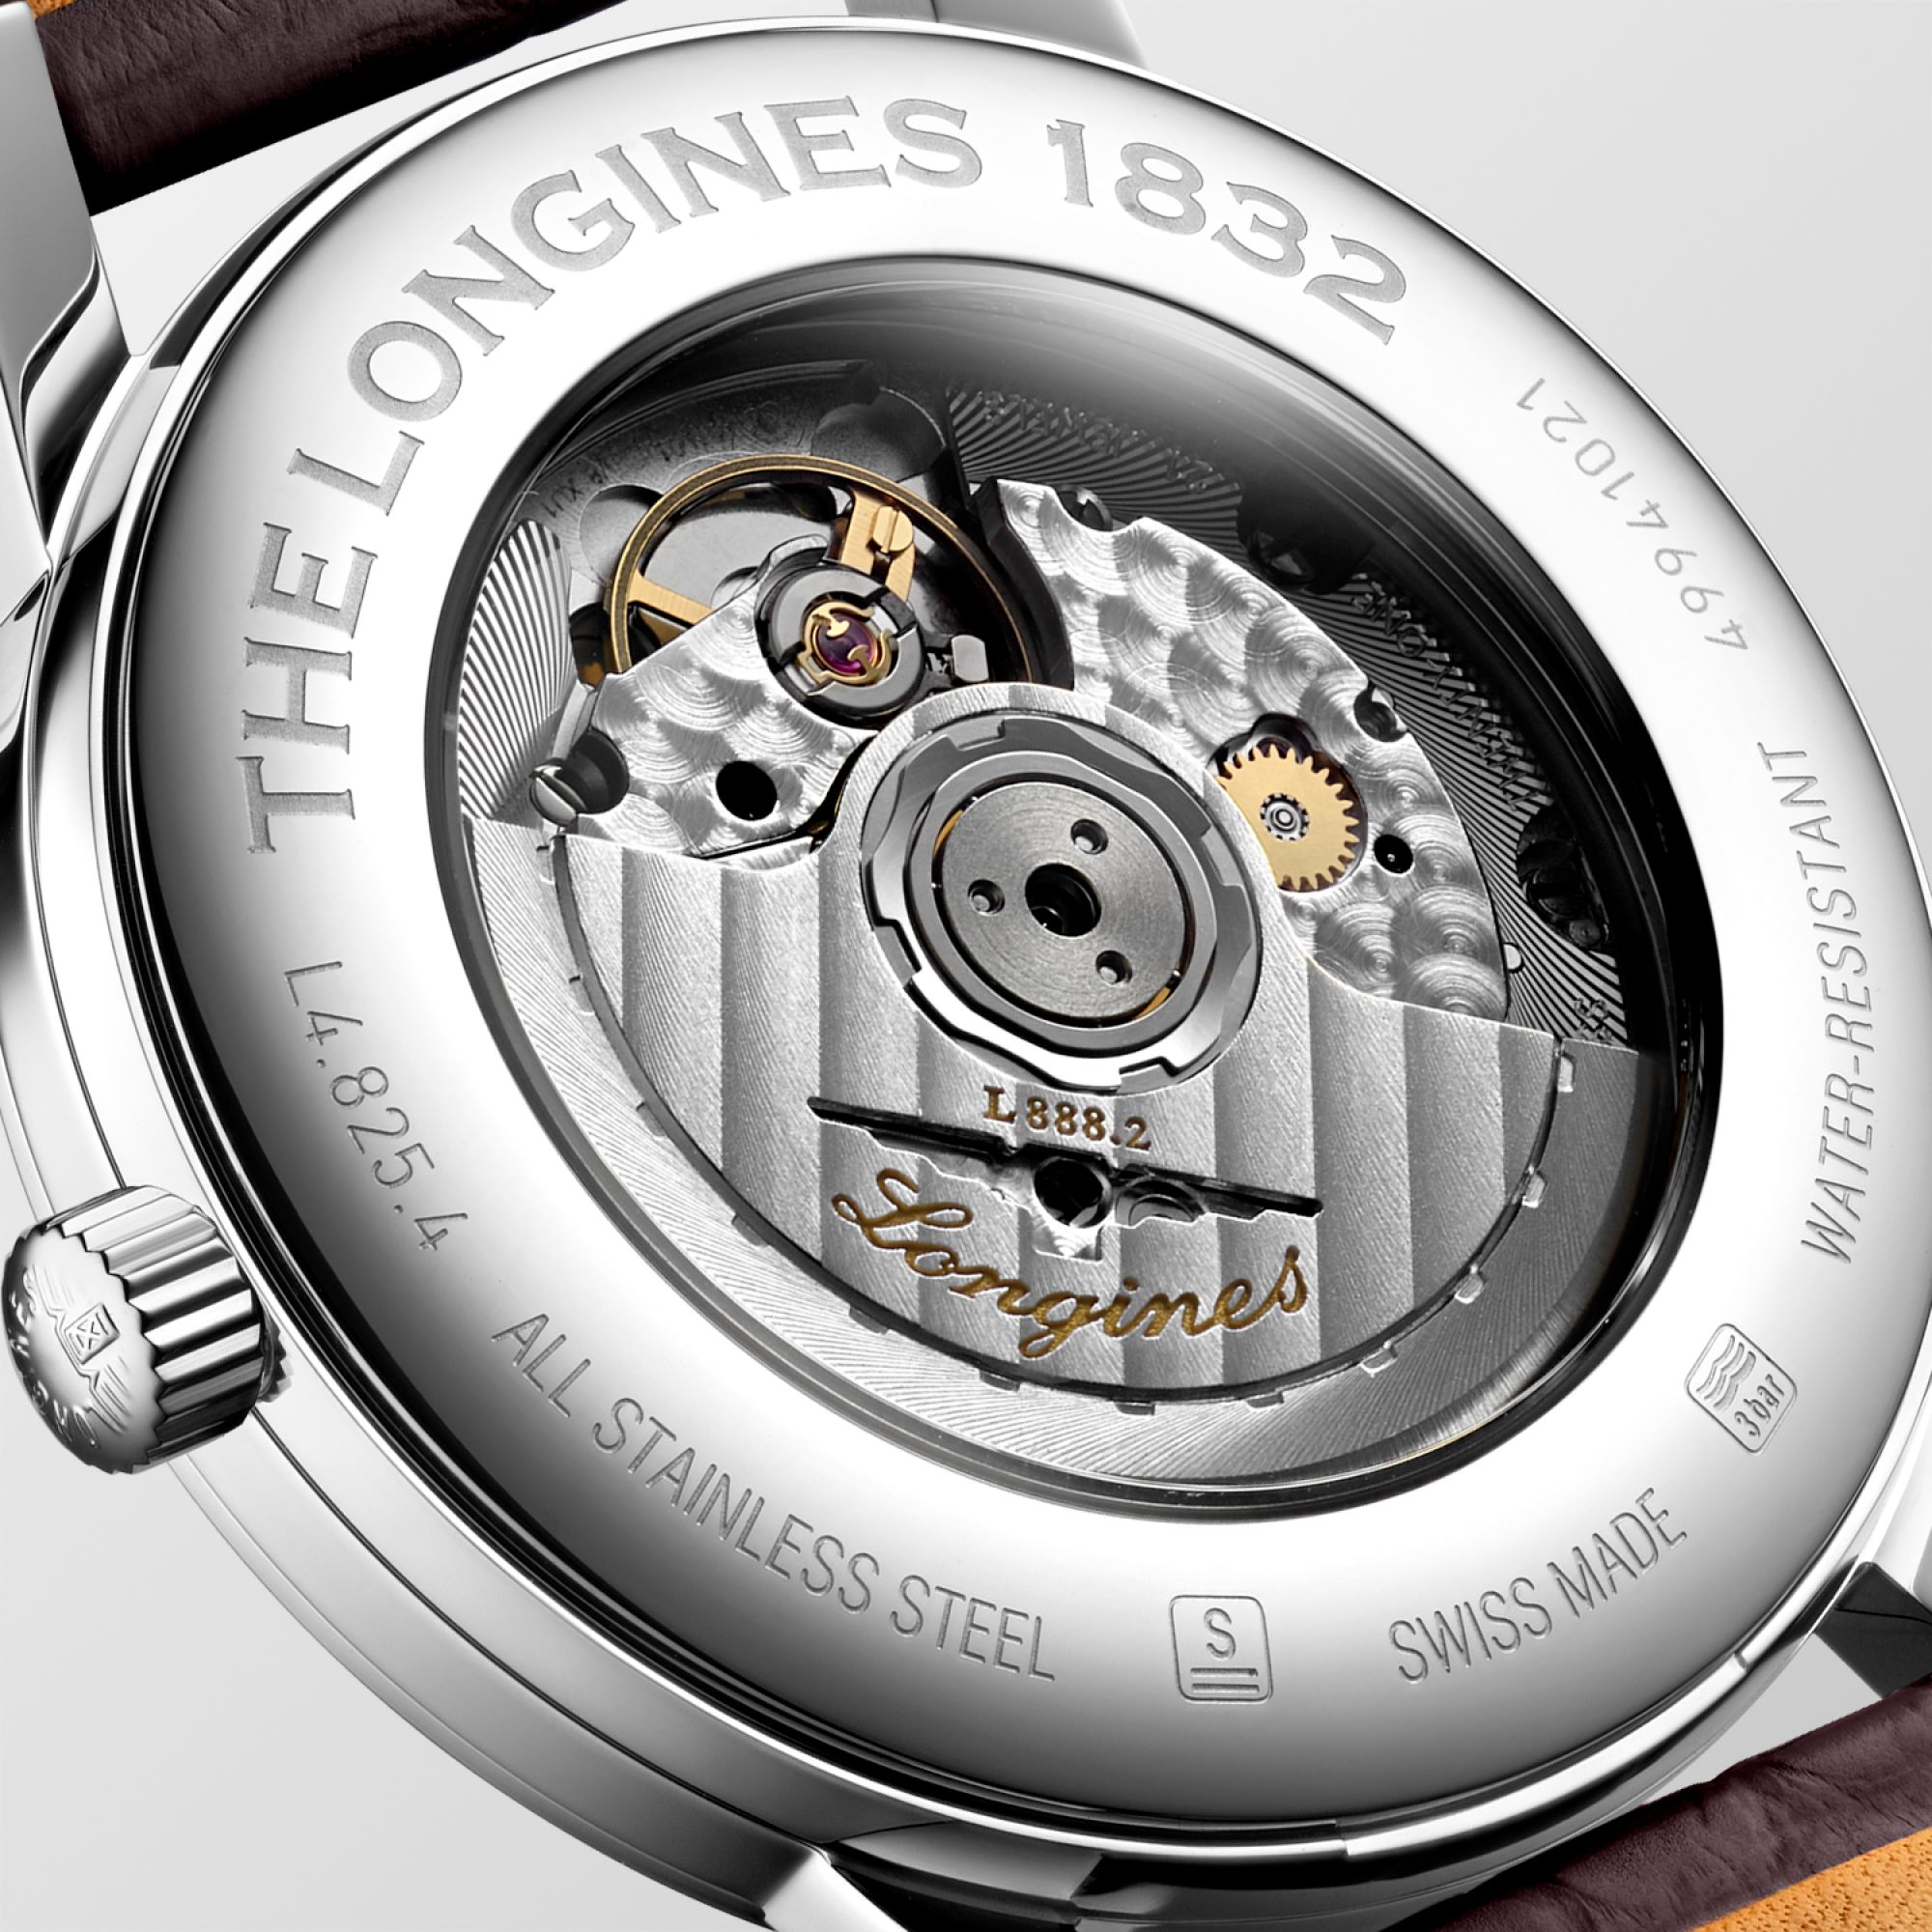 The Longines 1832 Watchmaking Tradition Référence :  L4.825.4.92.2 -3